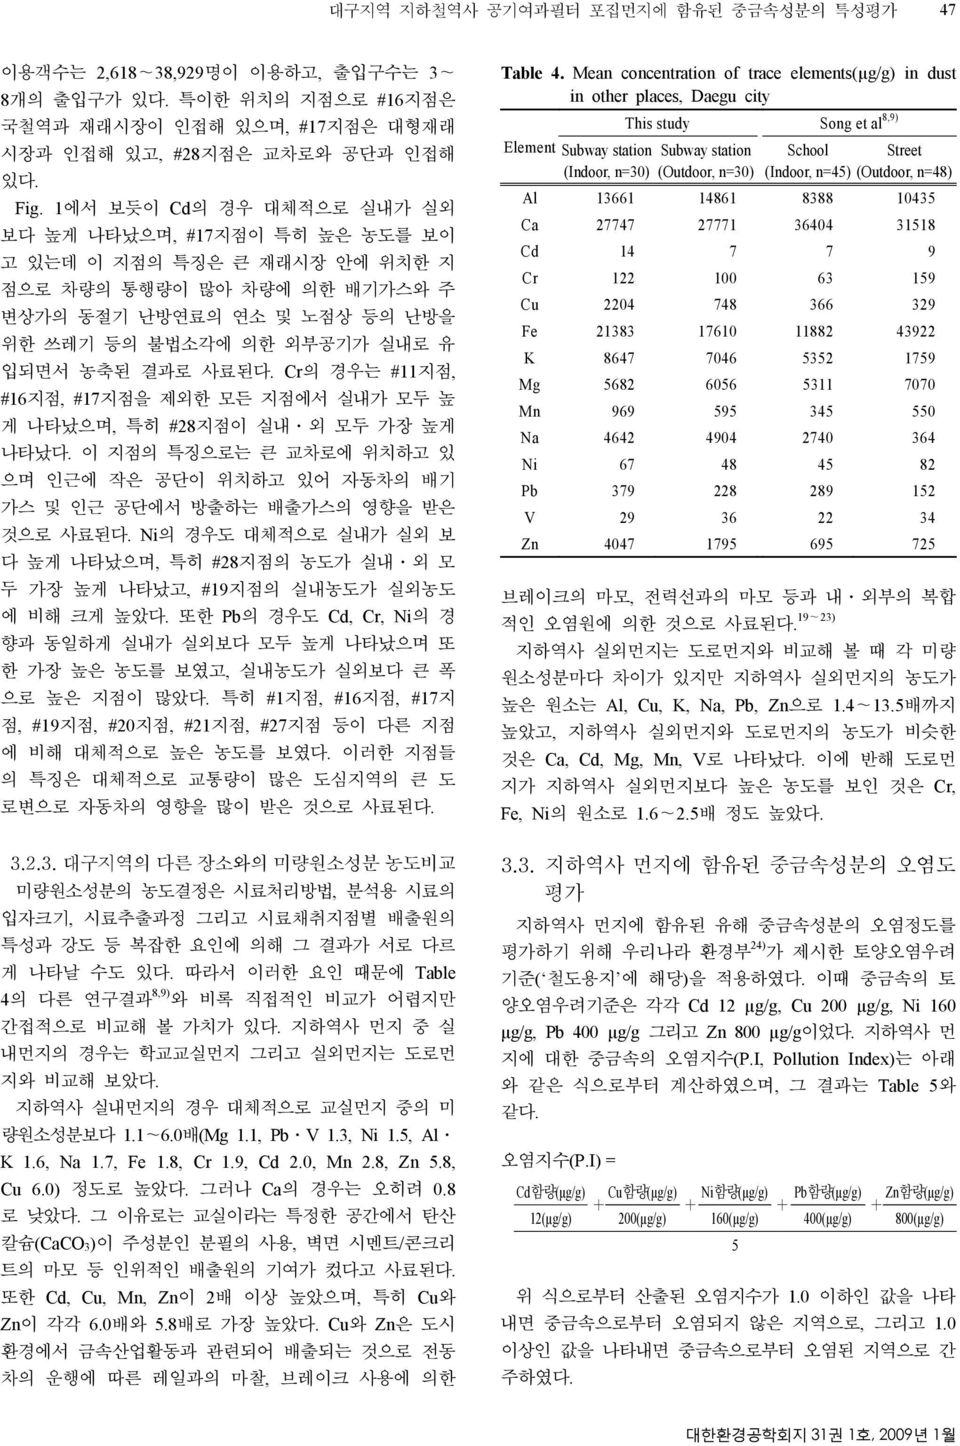 Mean concentration of trace elements(µg/g) in dust in other places, Daegu city This study Song et al 8,9) Element (Indoor, n=30) (Outdoor, n=30) School (Indoor, n=45) Street (Outdoor, n=48) Al 13661